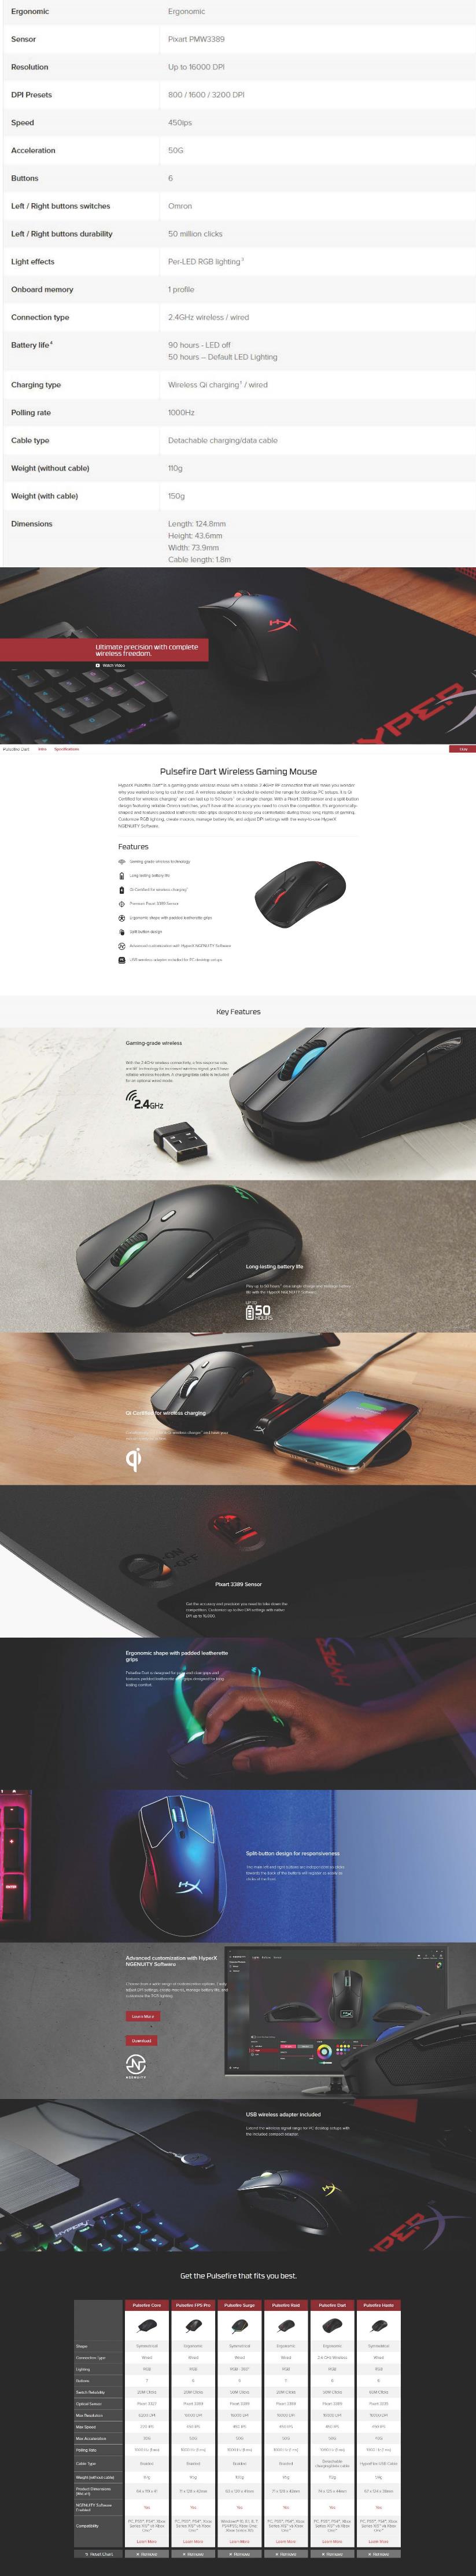 A large marketing image providing additional information about the product HyperX Pulsefire Dart - Wireless Gaming Mouse - Additional alt info not provided